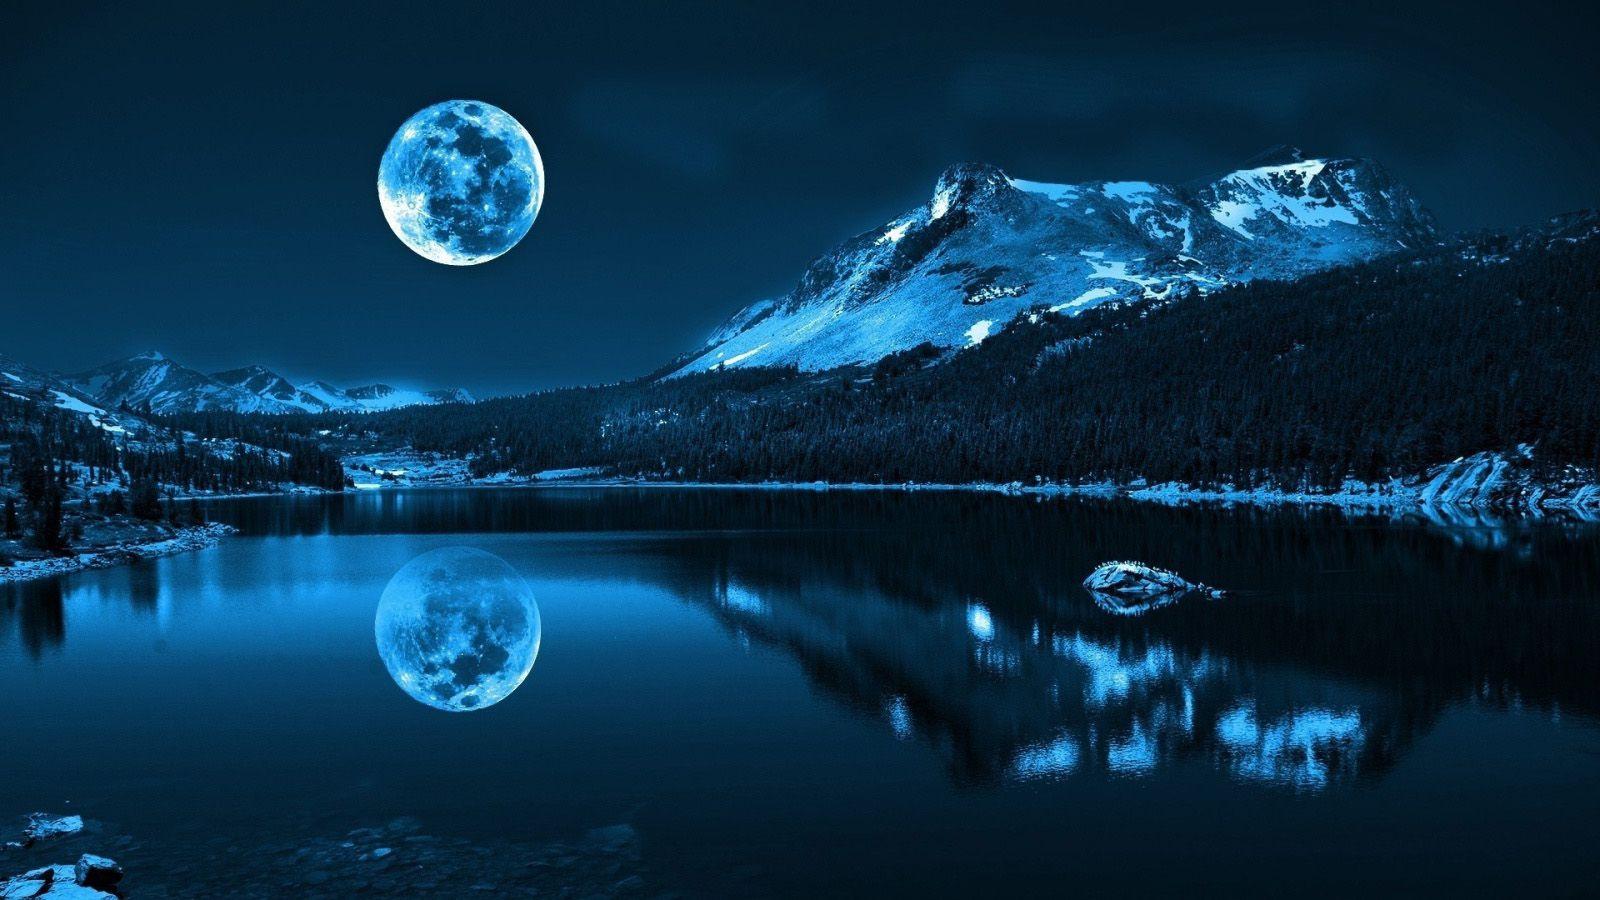 Night Nature Wallpapers - Top Free Night Nature Backgrounds ...